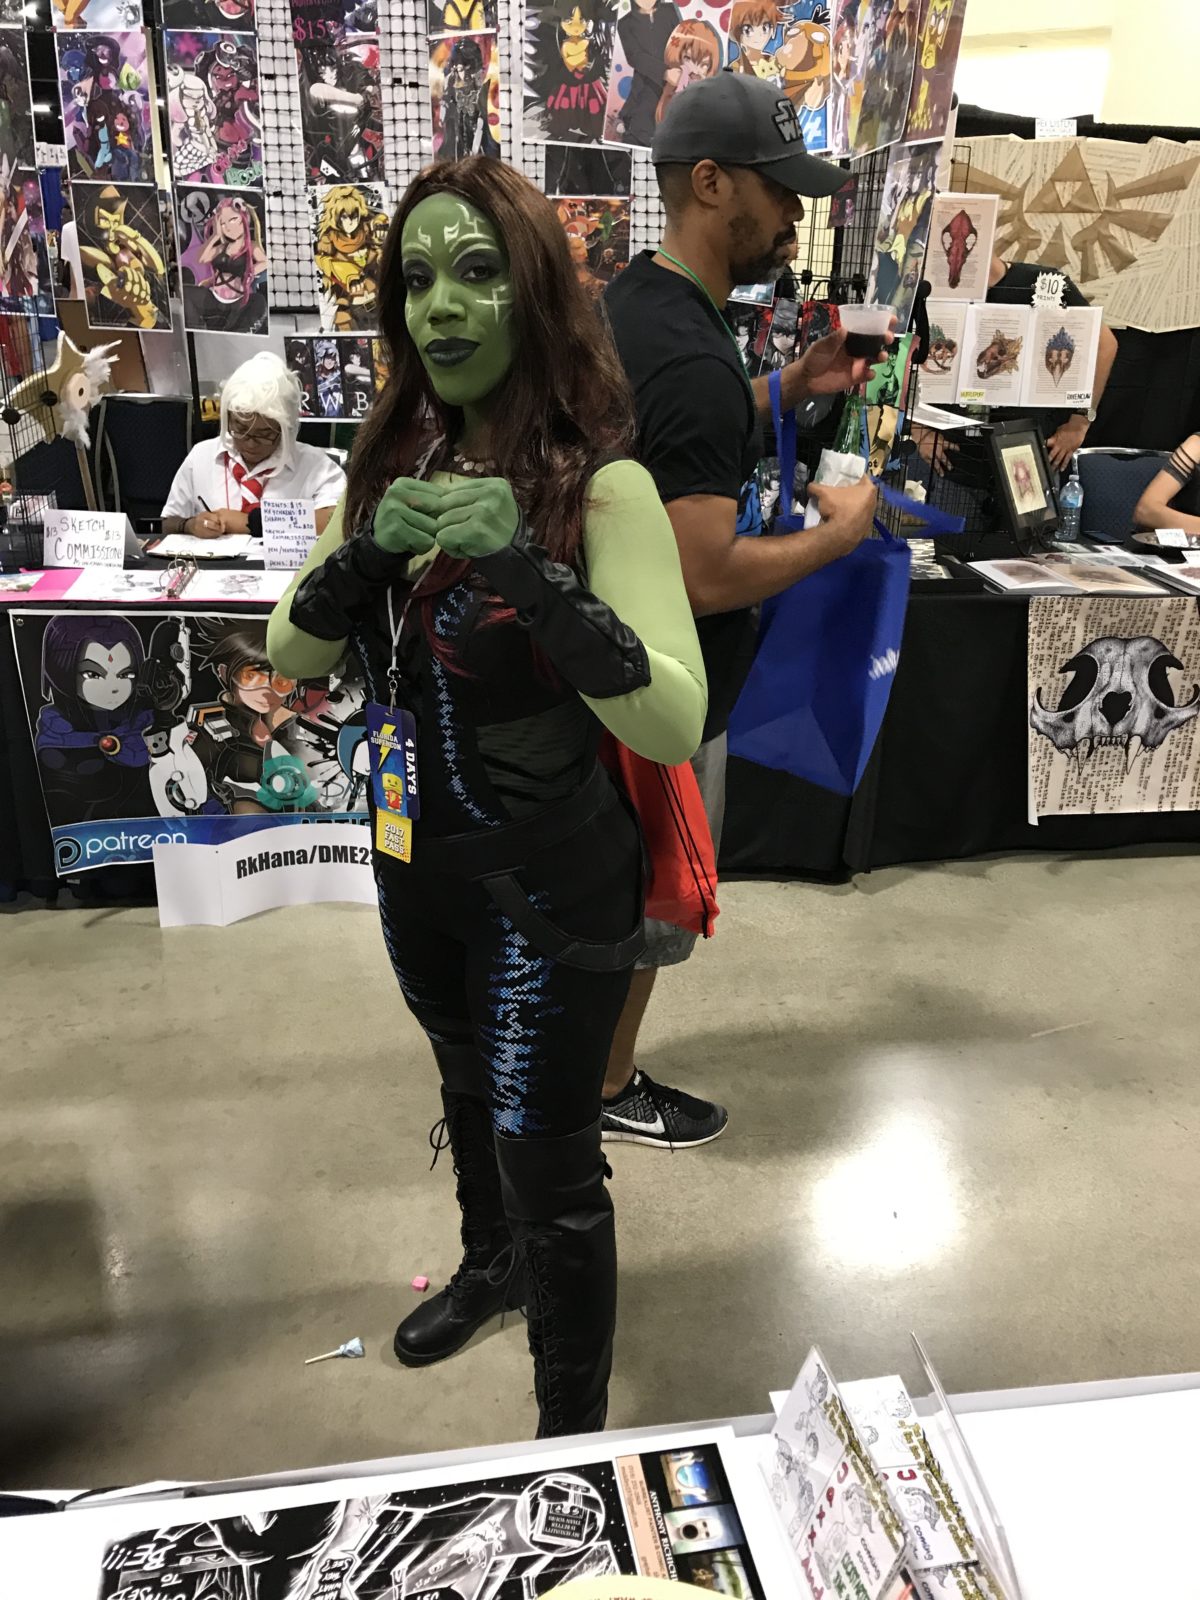 SUPER CosViews from Fort Lauderdale SUPERCON:  A Guardians of the Galaxy showed up in Fort Lauderdale : Gamora